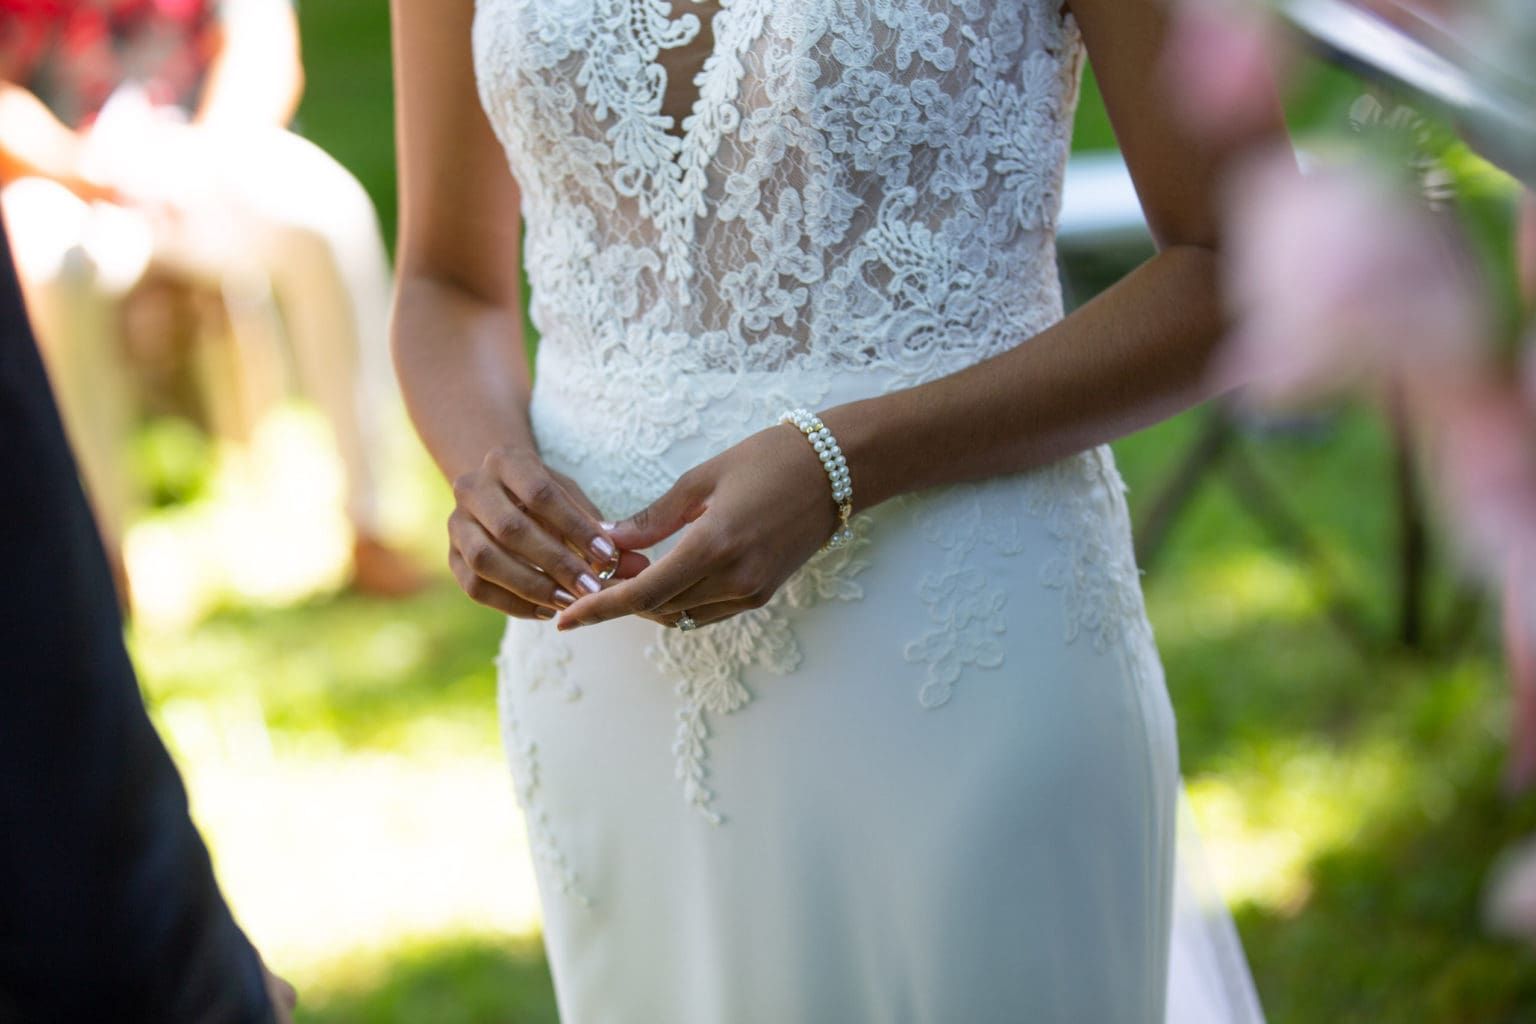 A close up of a woman in a wedding dress holding her hands together.